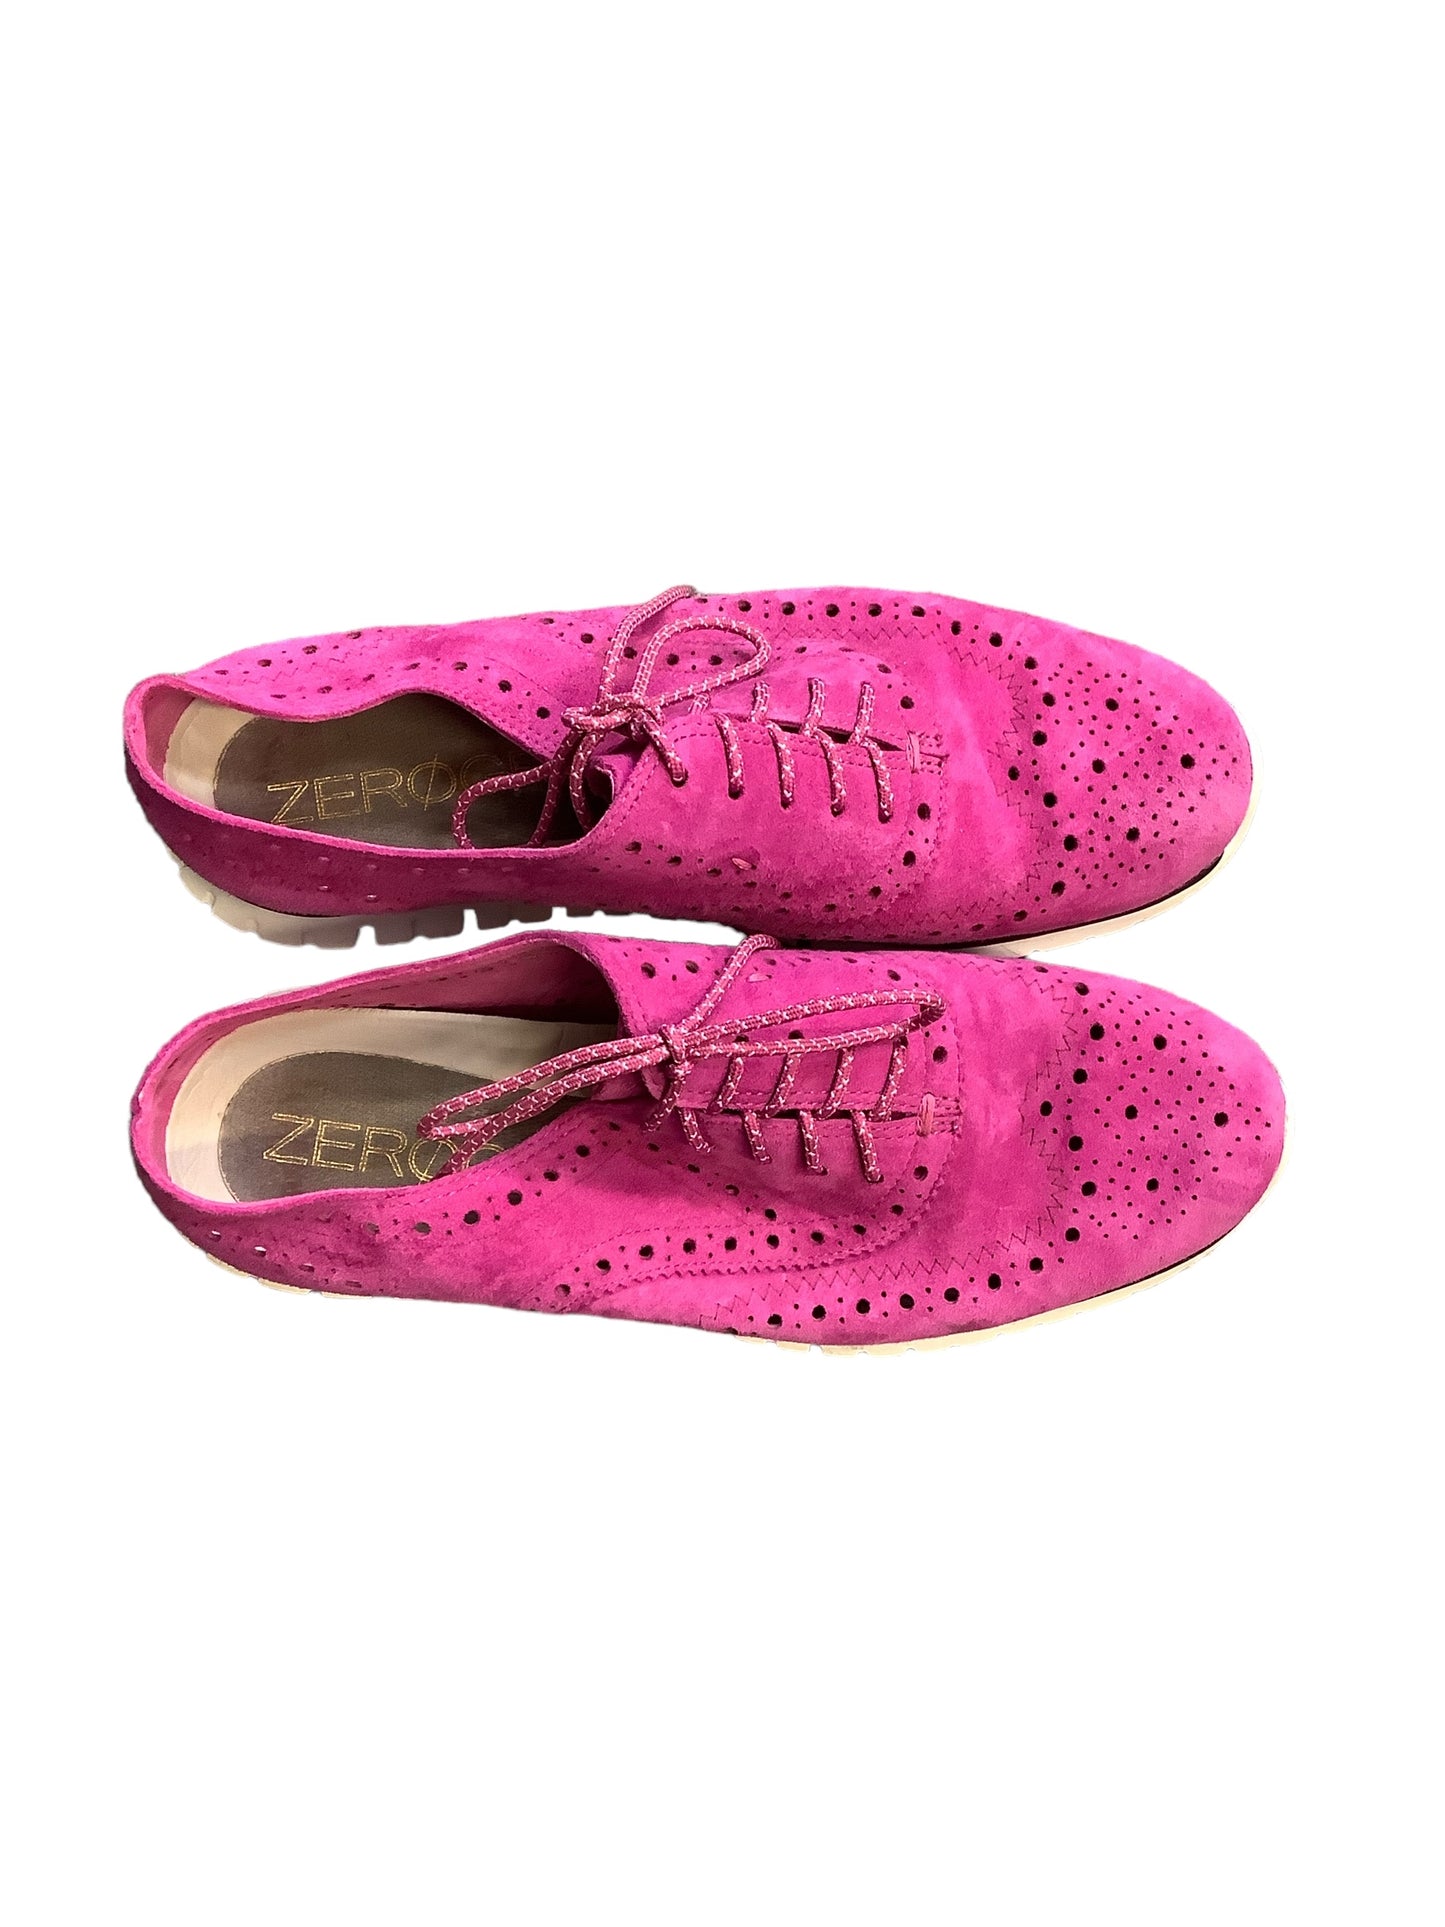 Shoes Flats By Cole-haan  Size: 7